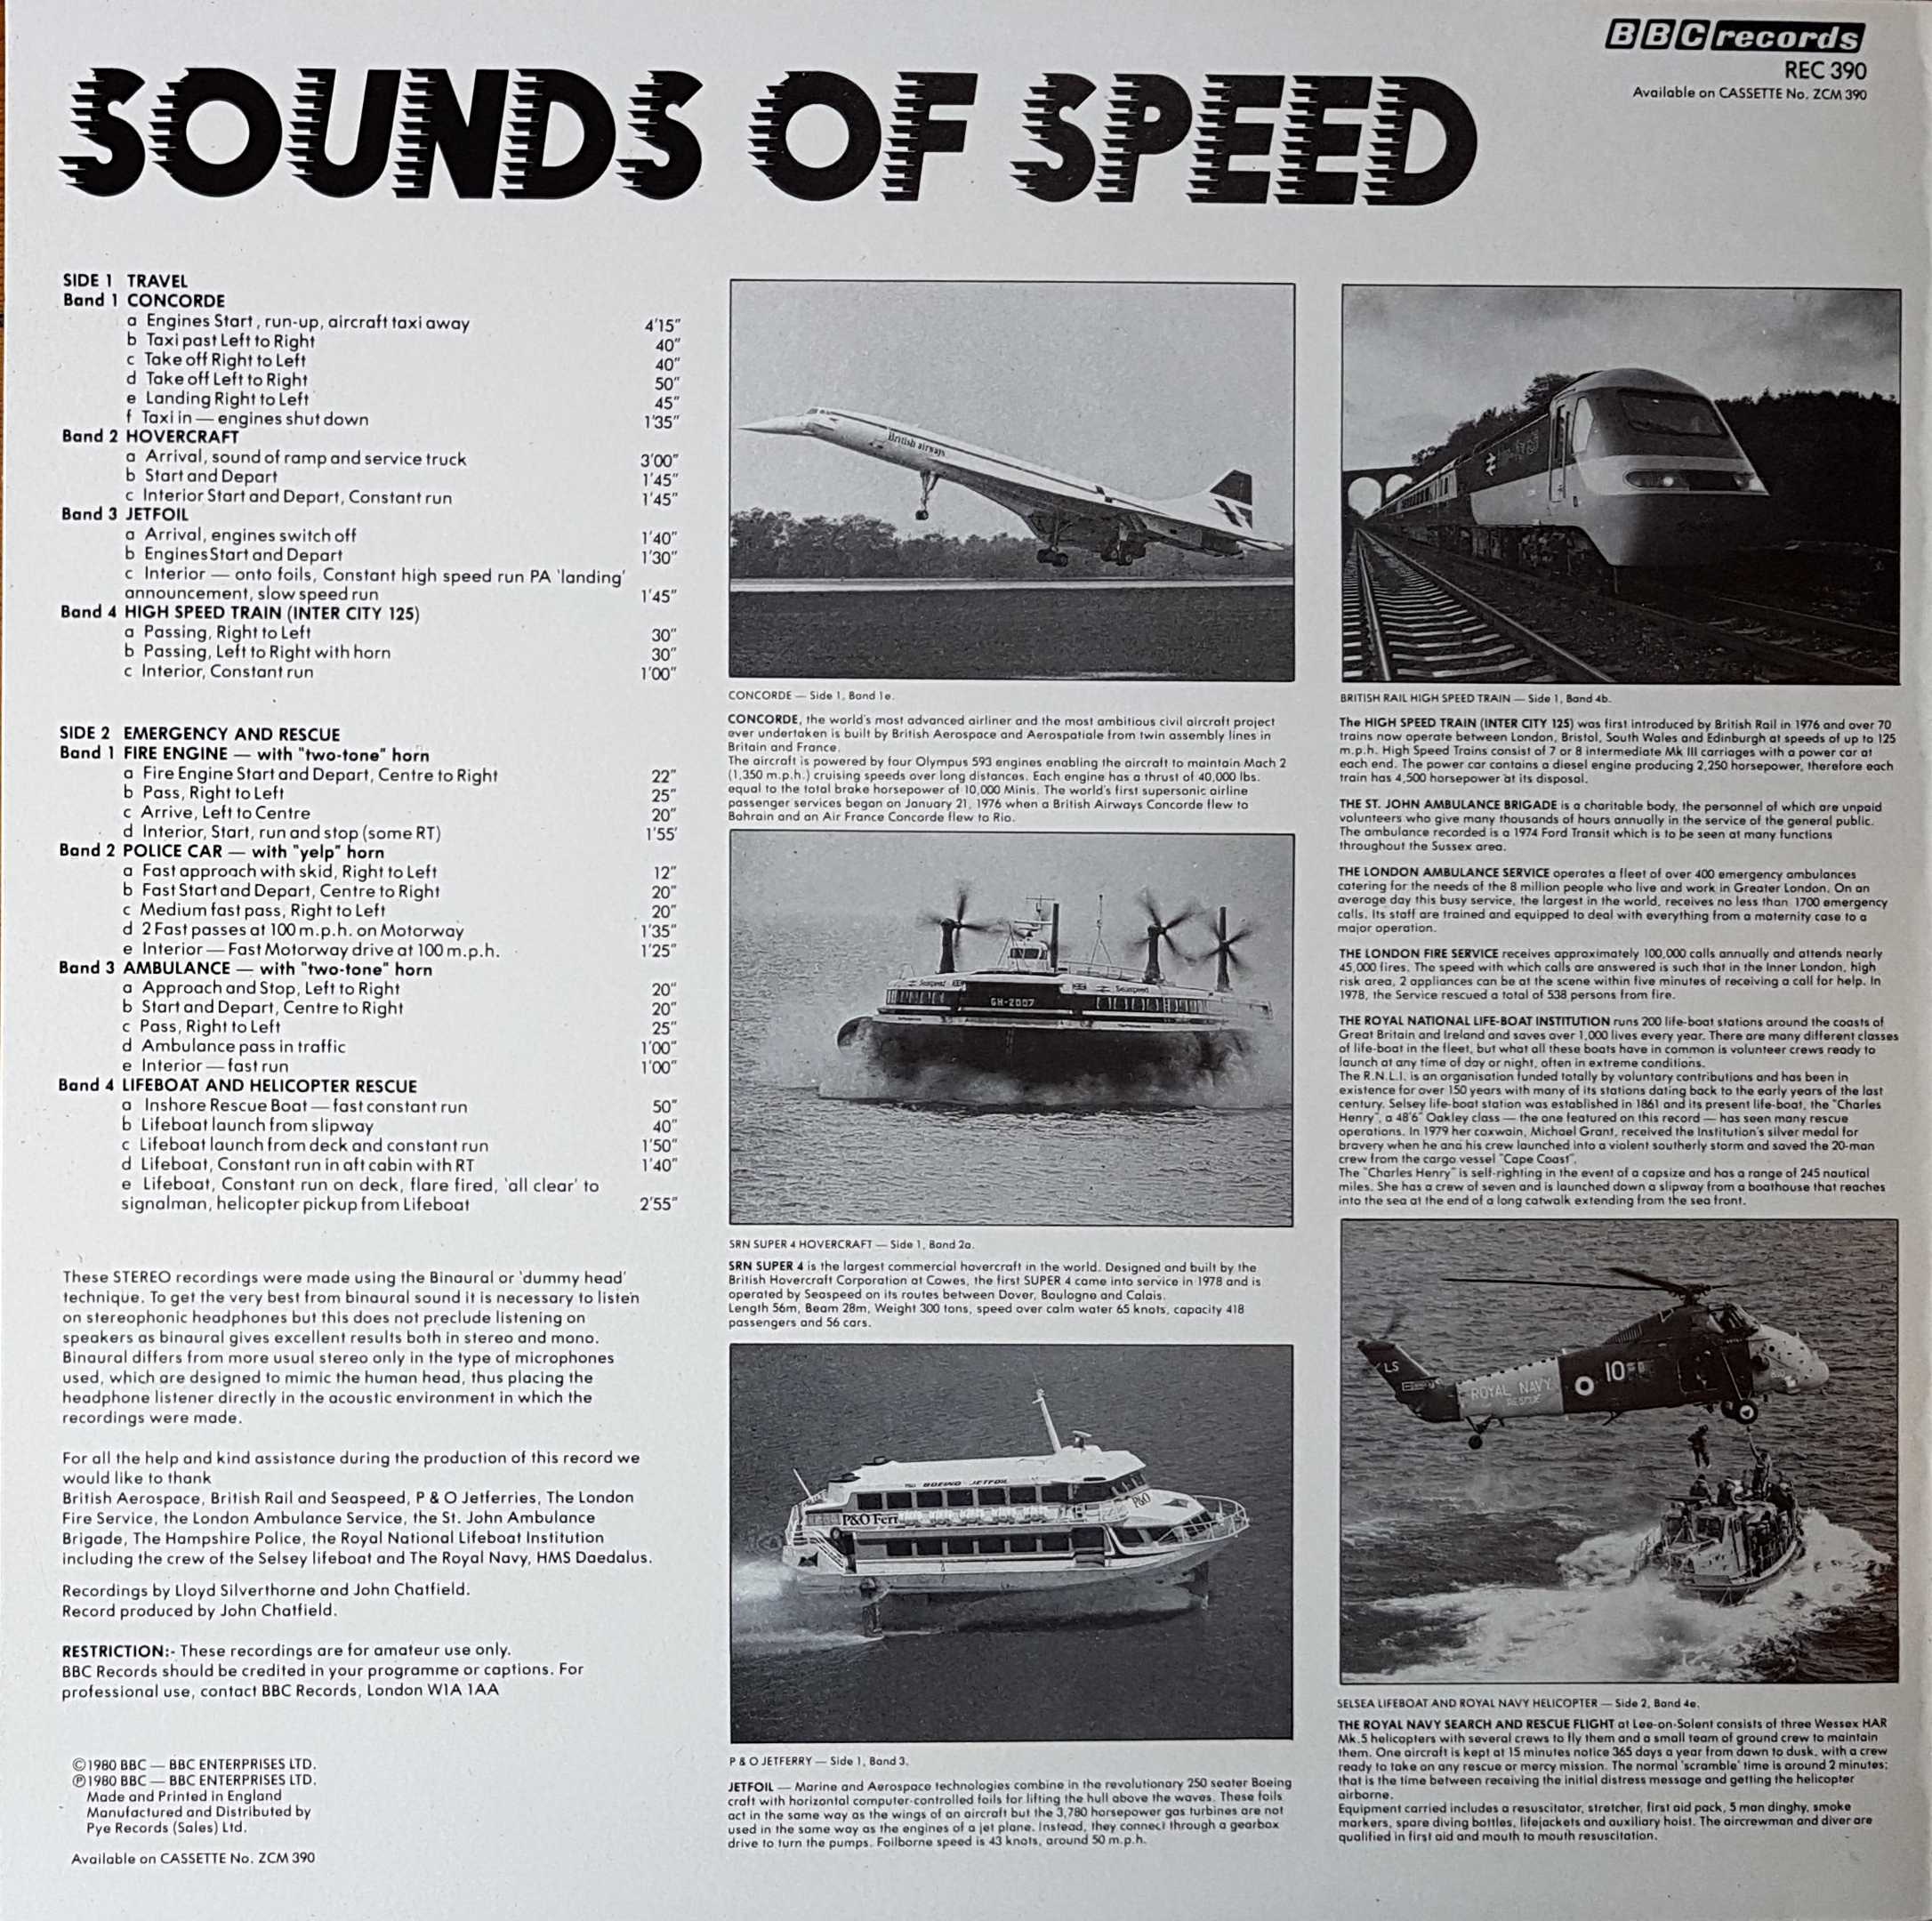 Picture of REC 390 Sounds of speed by artist Various from the BBC records and Tapes library